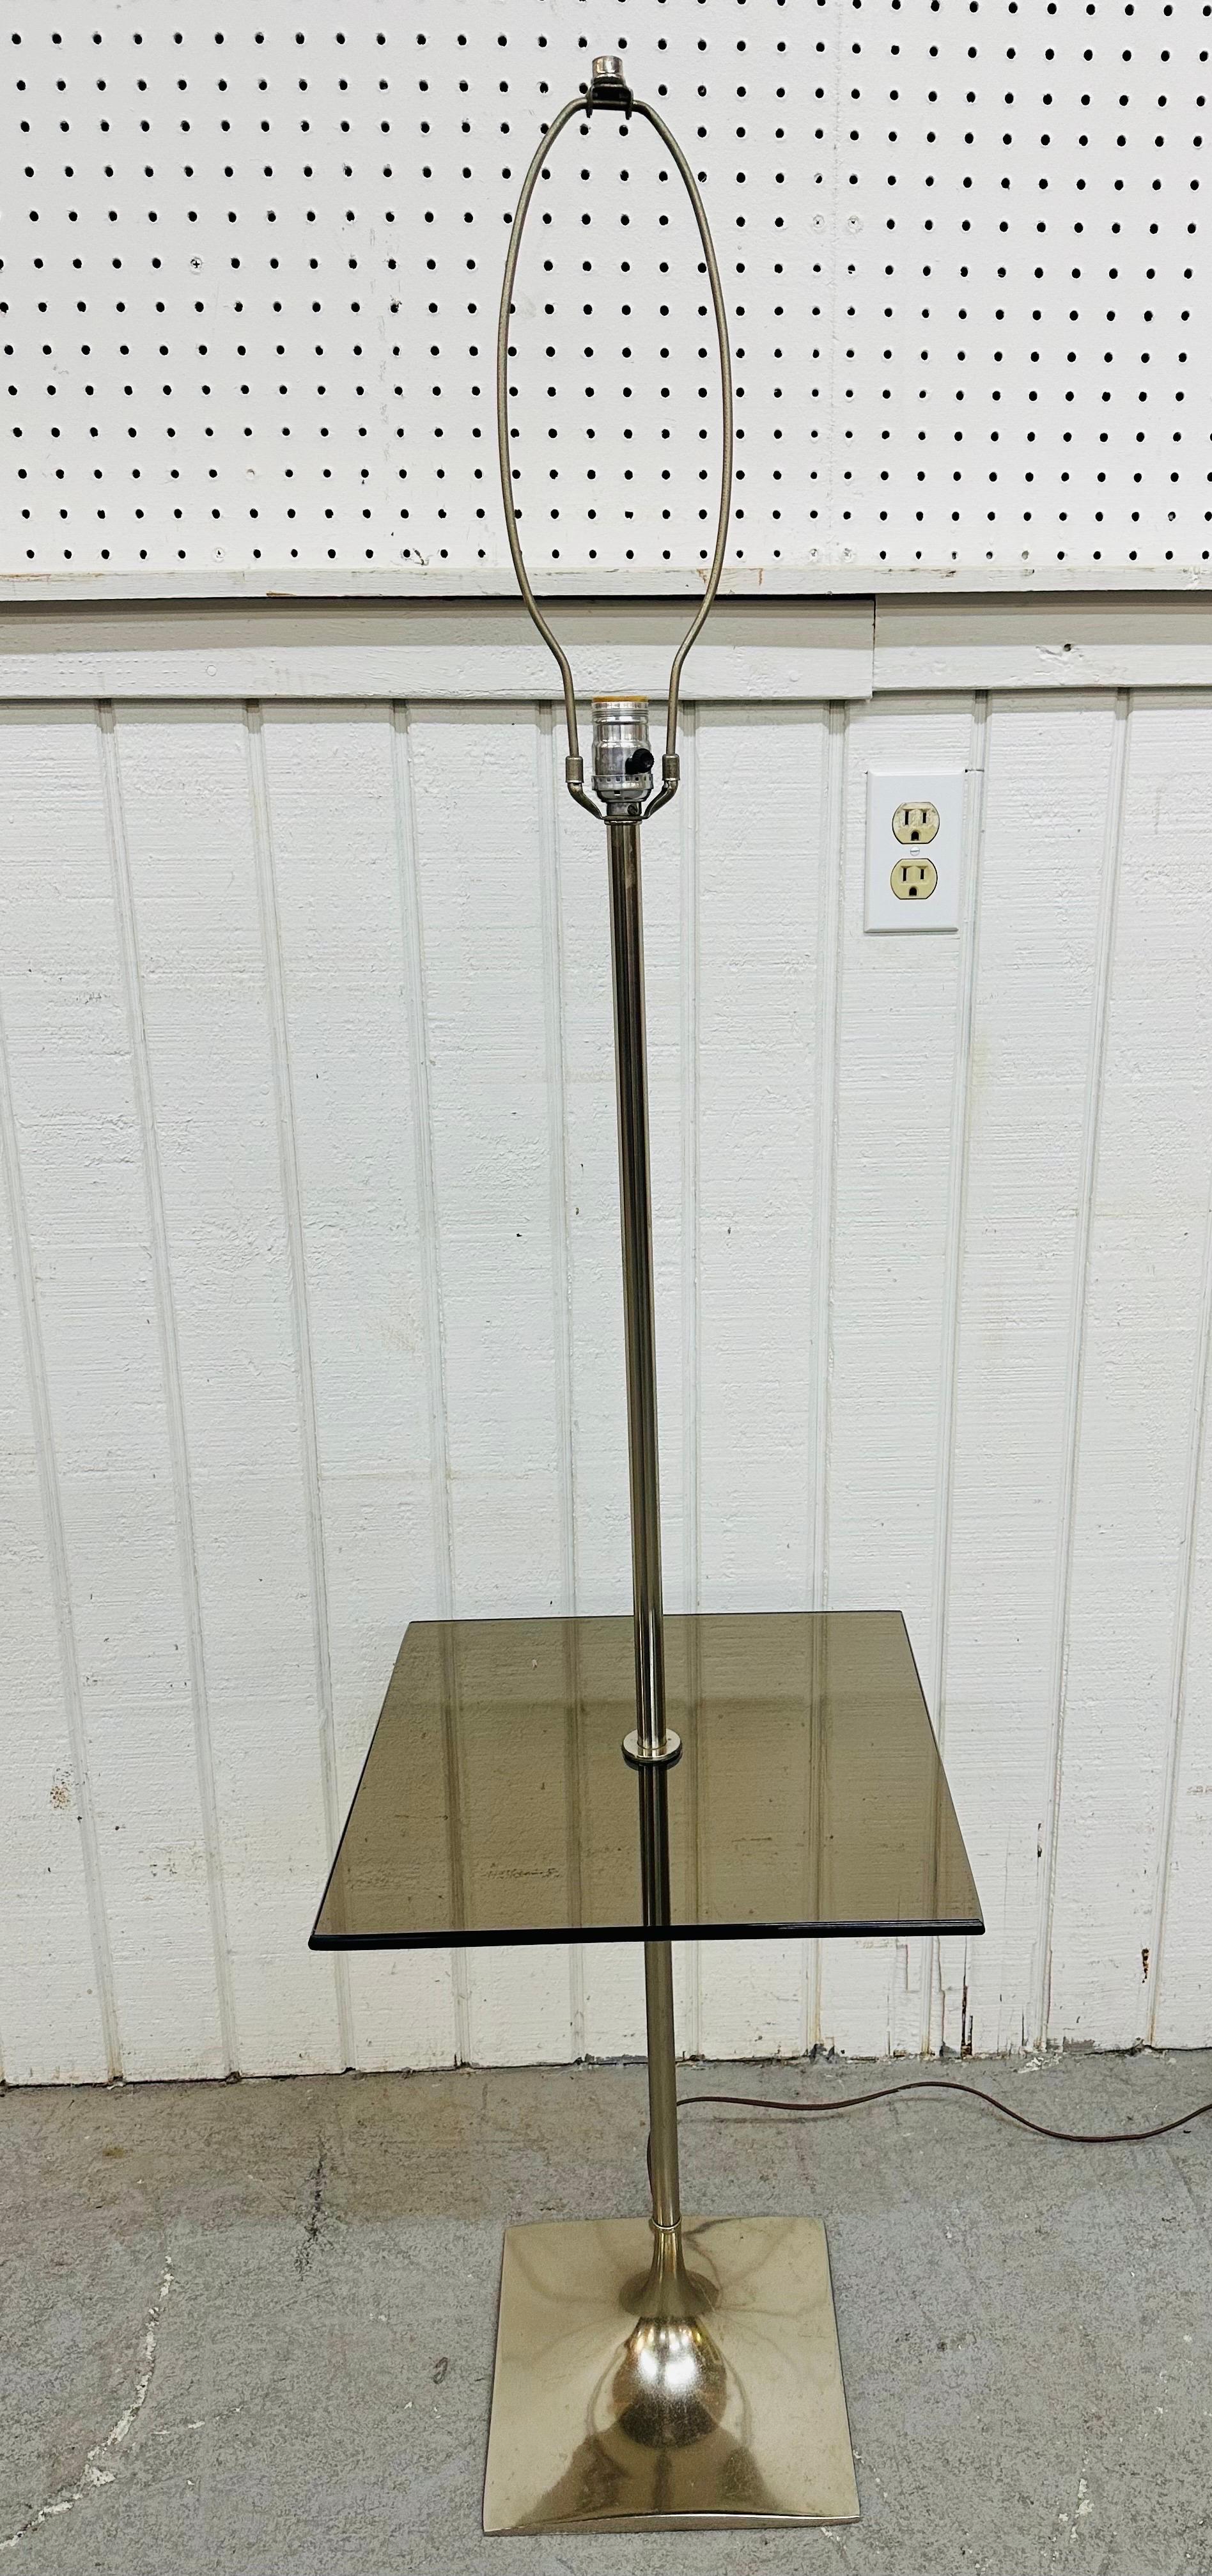 This listing is for a vintage Modern Chrome Floor Lamp. Featuring a chrome body, square smoked glass shelf, and original cord. This is an exceptional combination of quality and design!